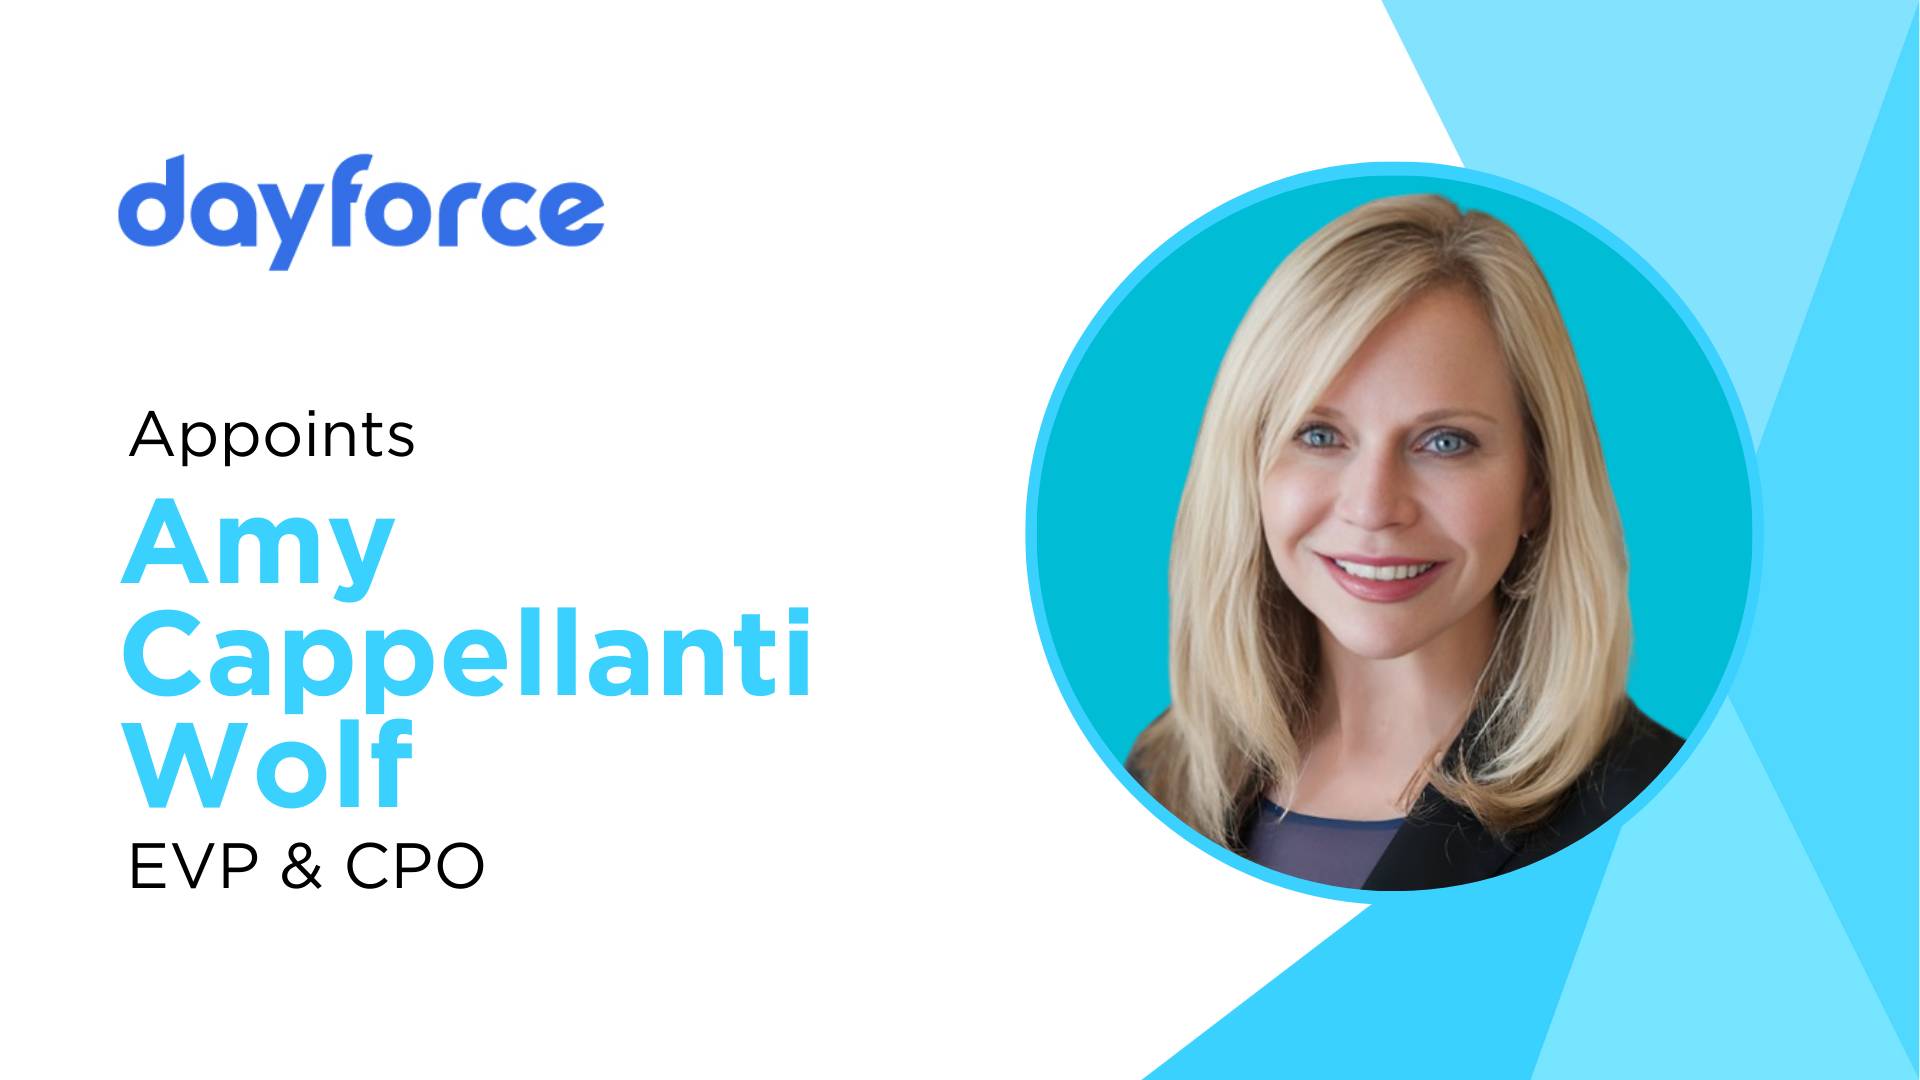 Dayforce Welcomes Amy Cappellanti-Wolf as EVP & Chief People Officer